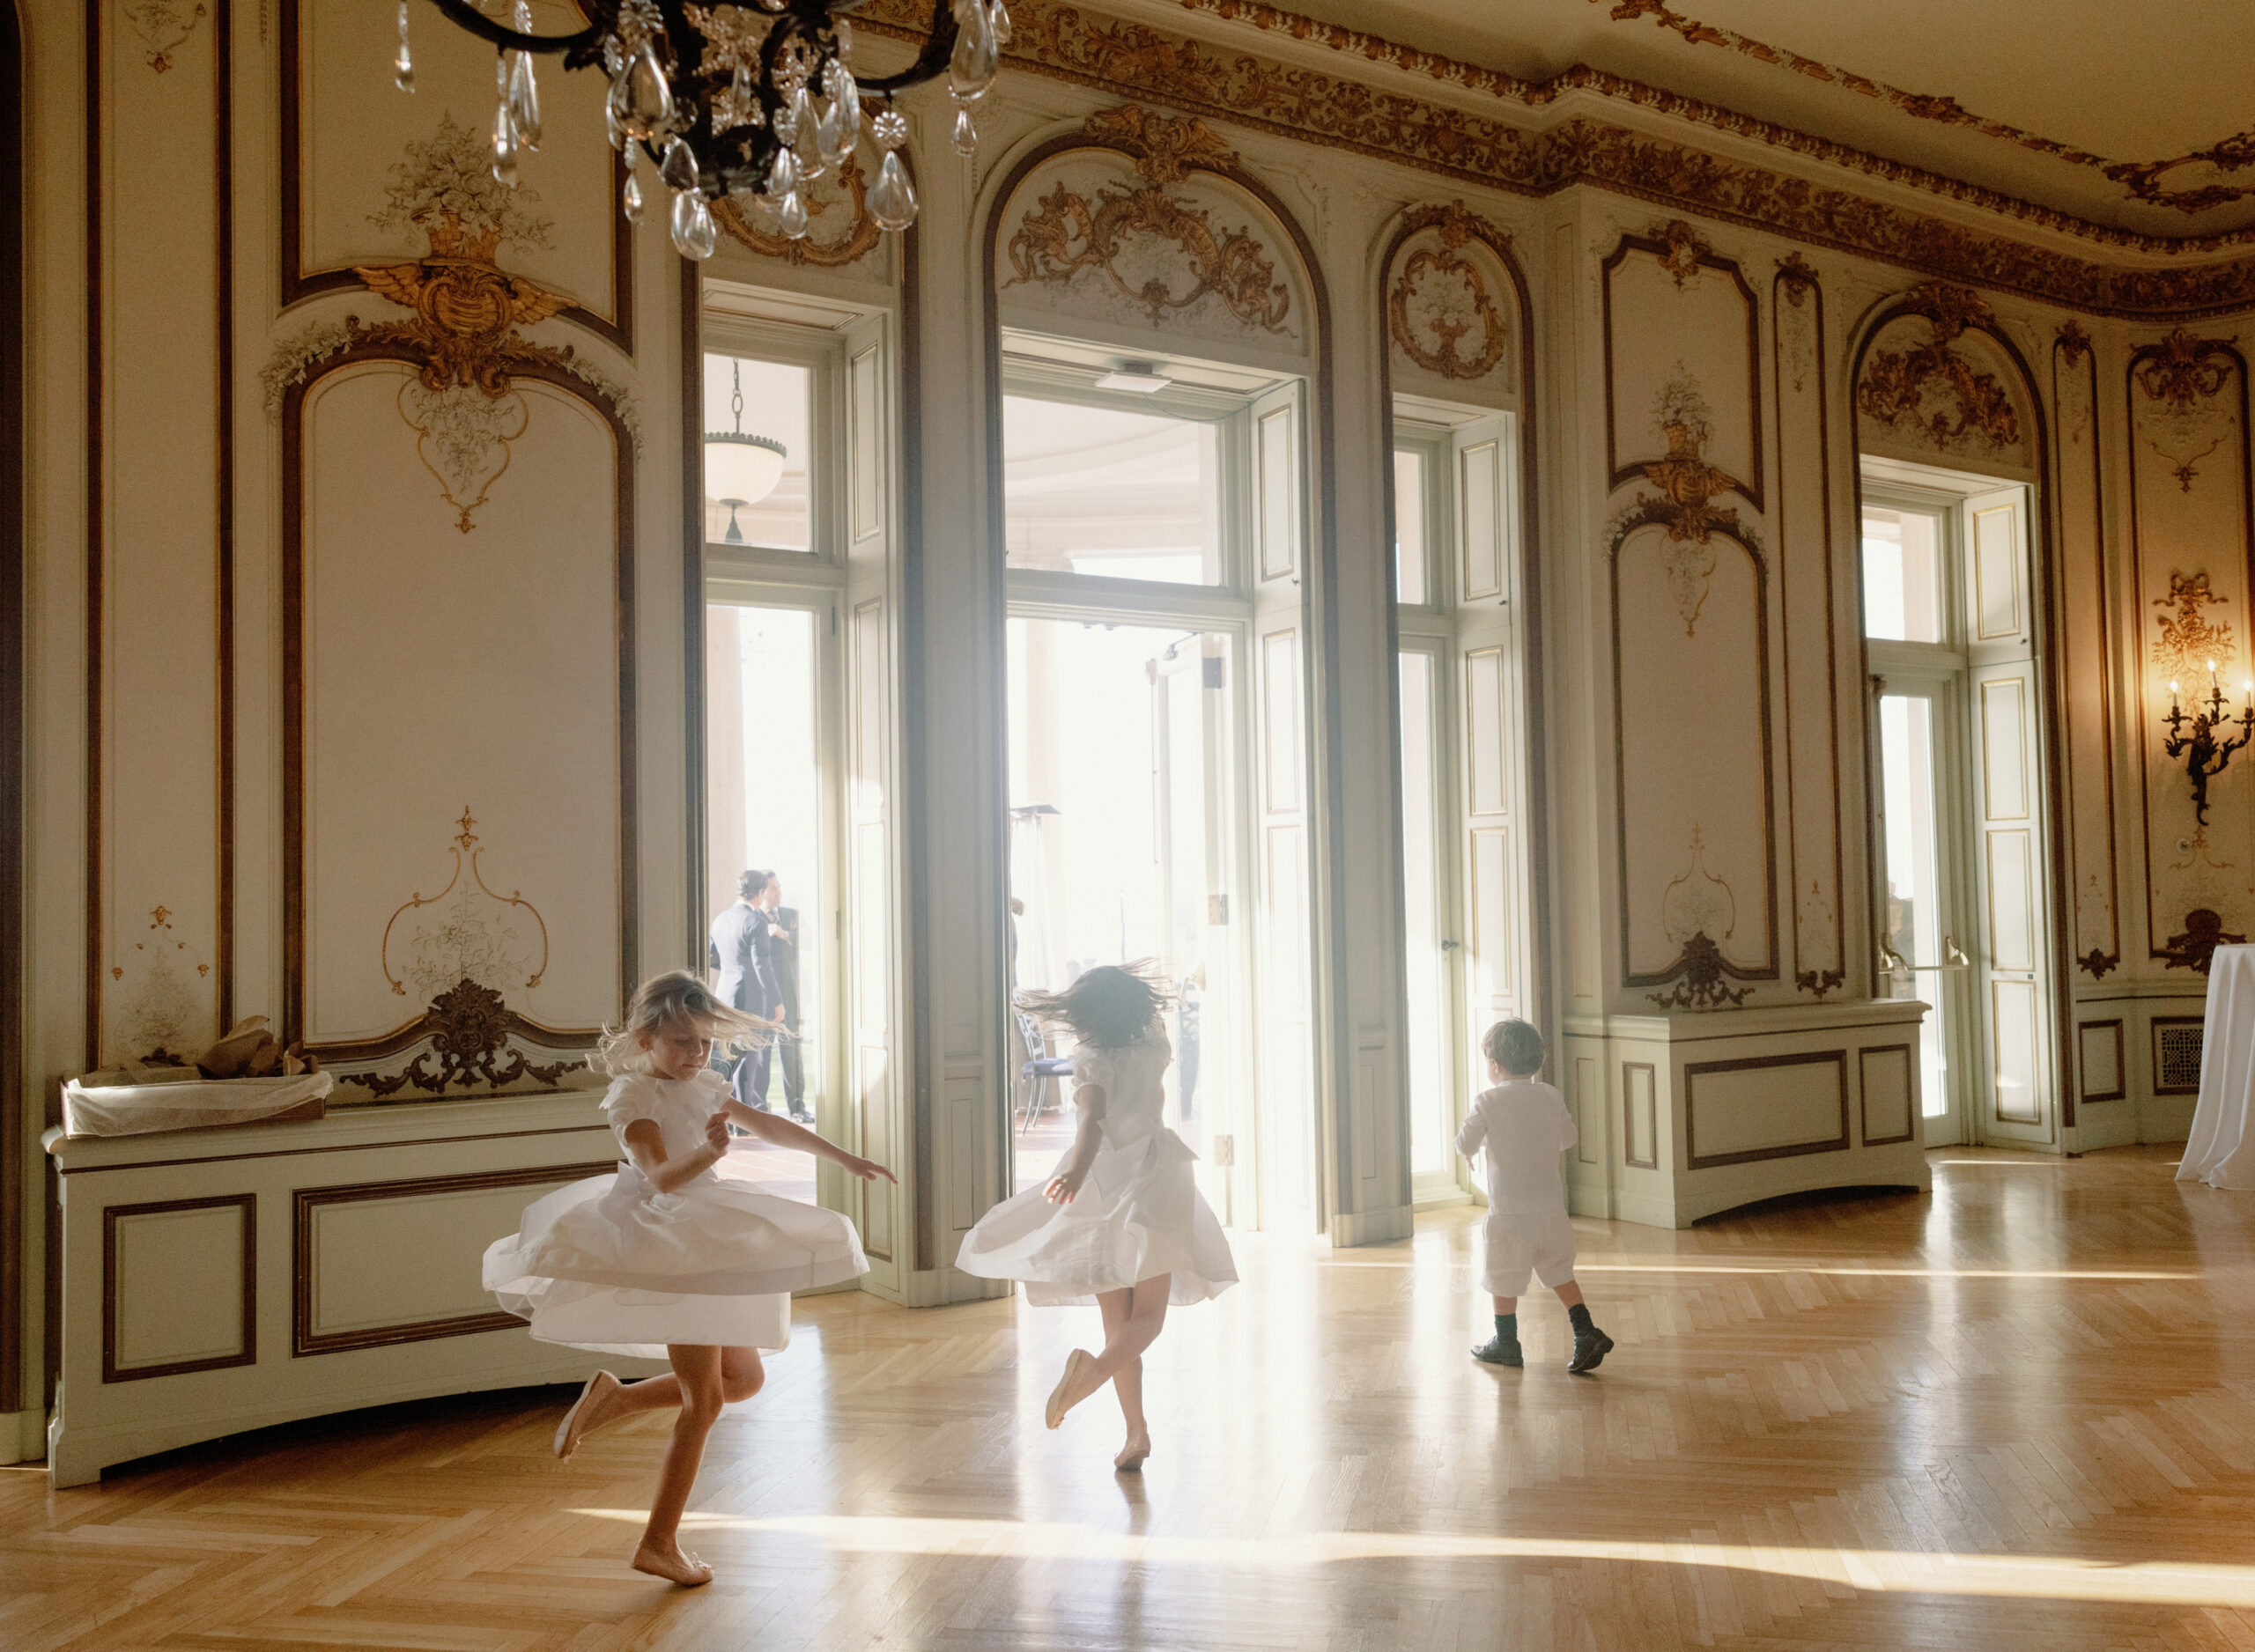 Flower girls are dancing in a huge room. Latest wedding trends image by Jenny Fu Studio